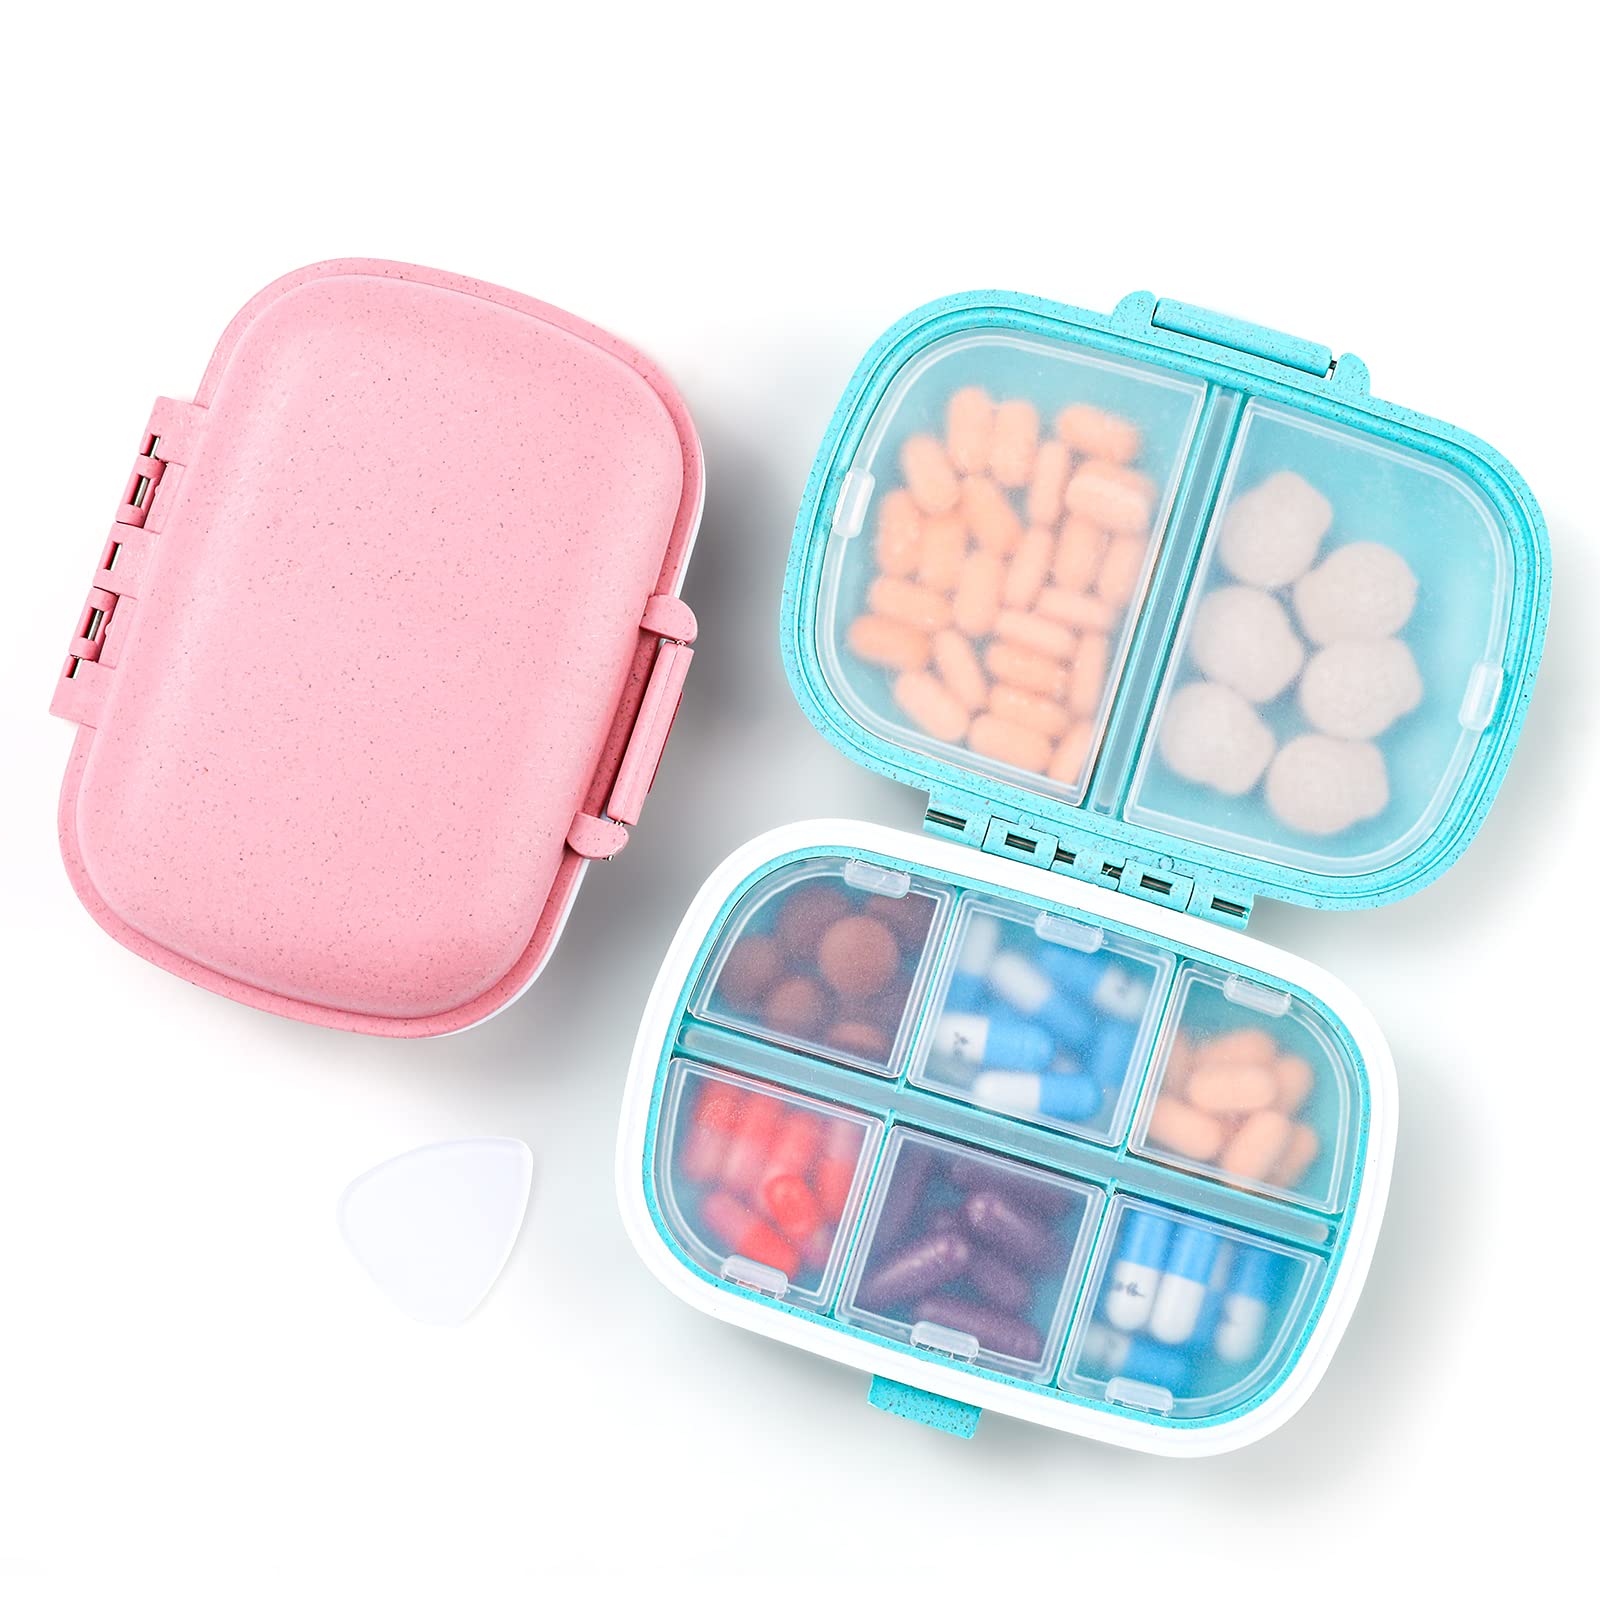  xigua Anchor Pill Cases Bag,8 Compartments Portable Pill Case  Vitamin and Supplement Holder, Small Pill Box for Backpack Pocket : Health  & Household